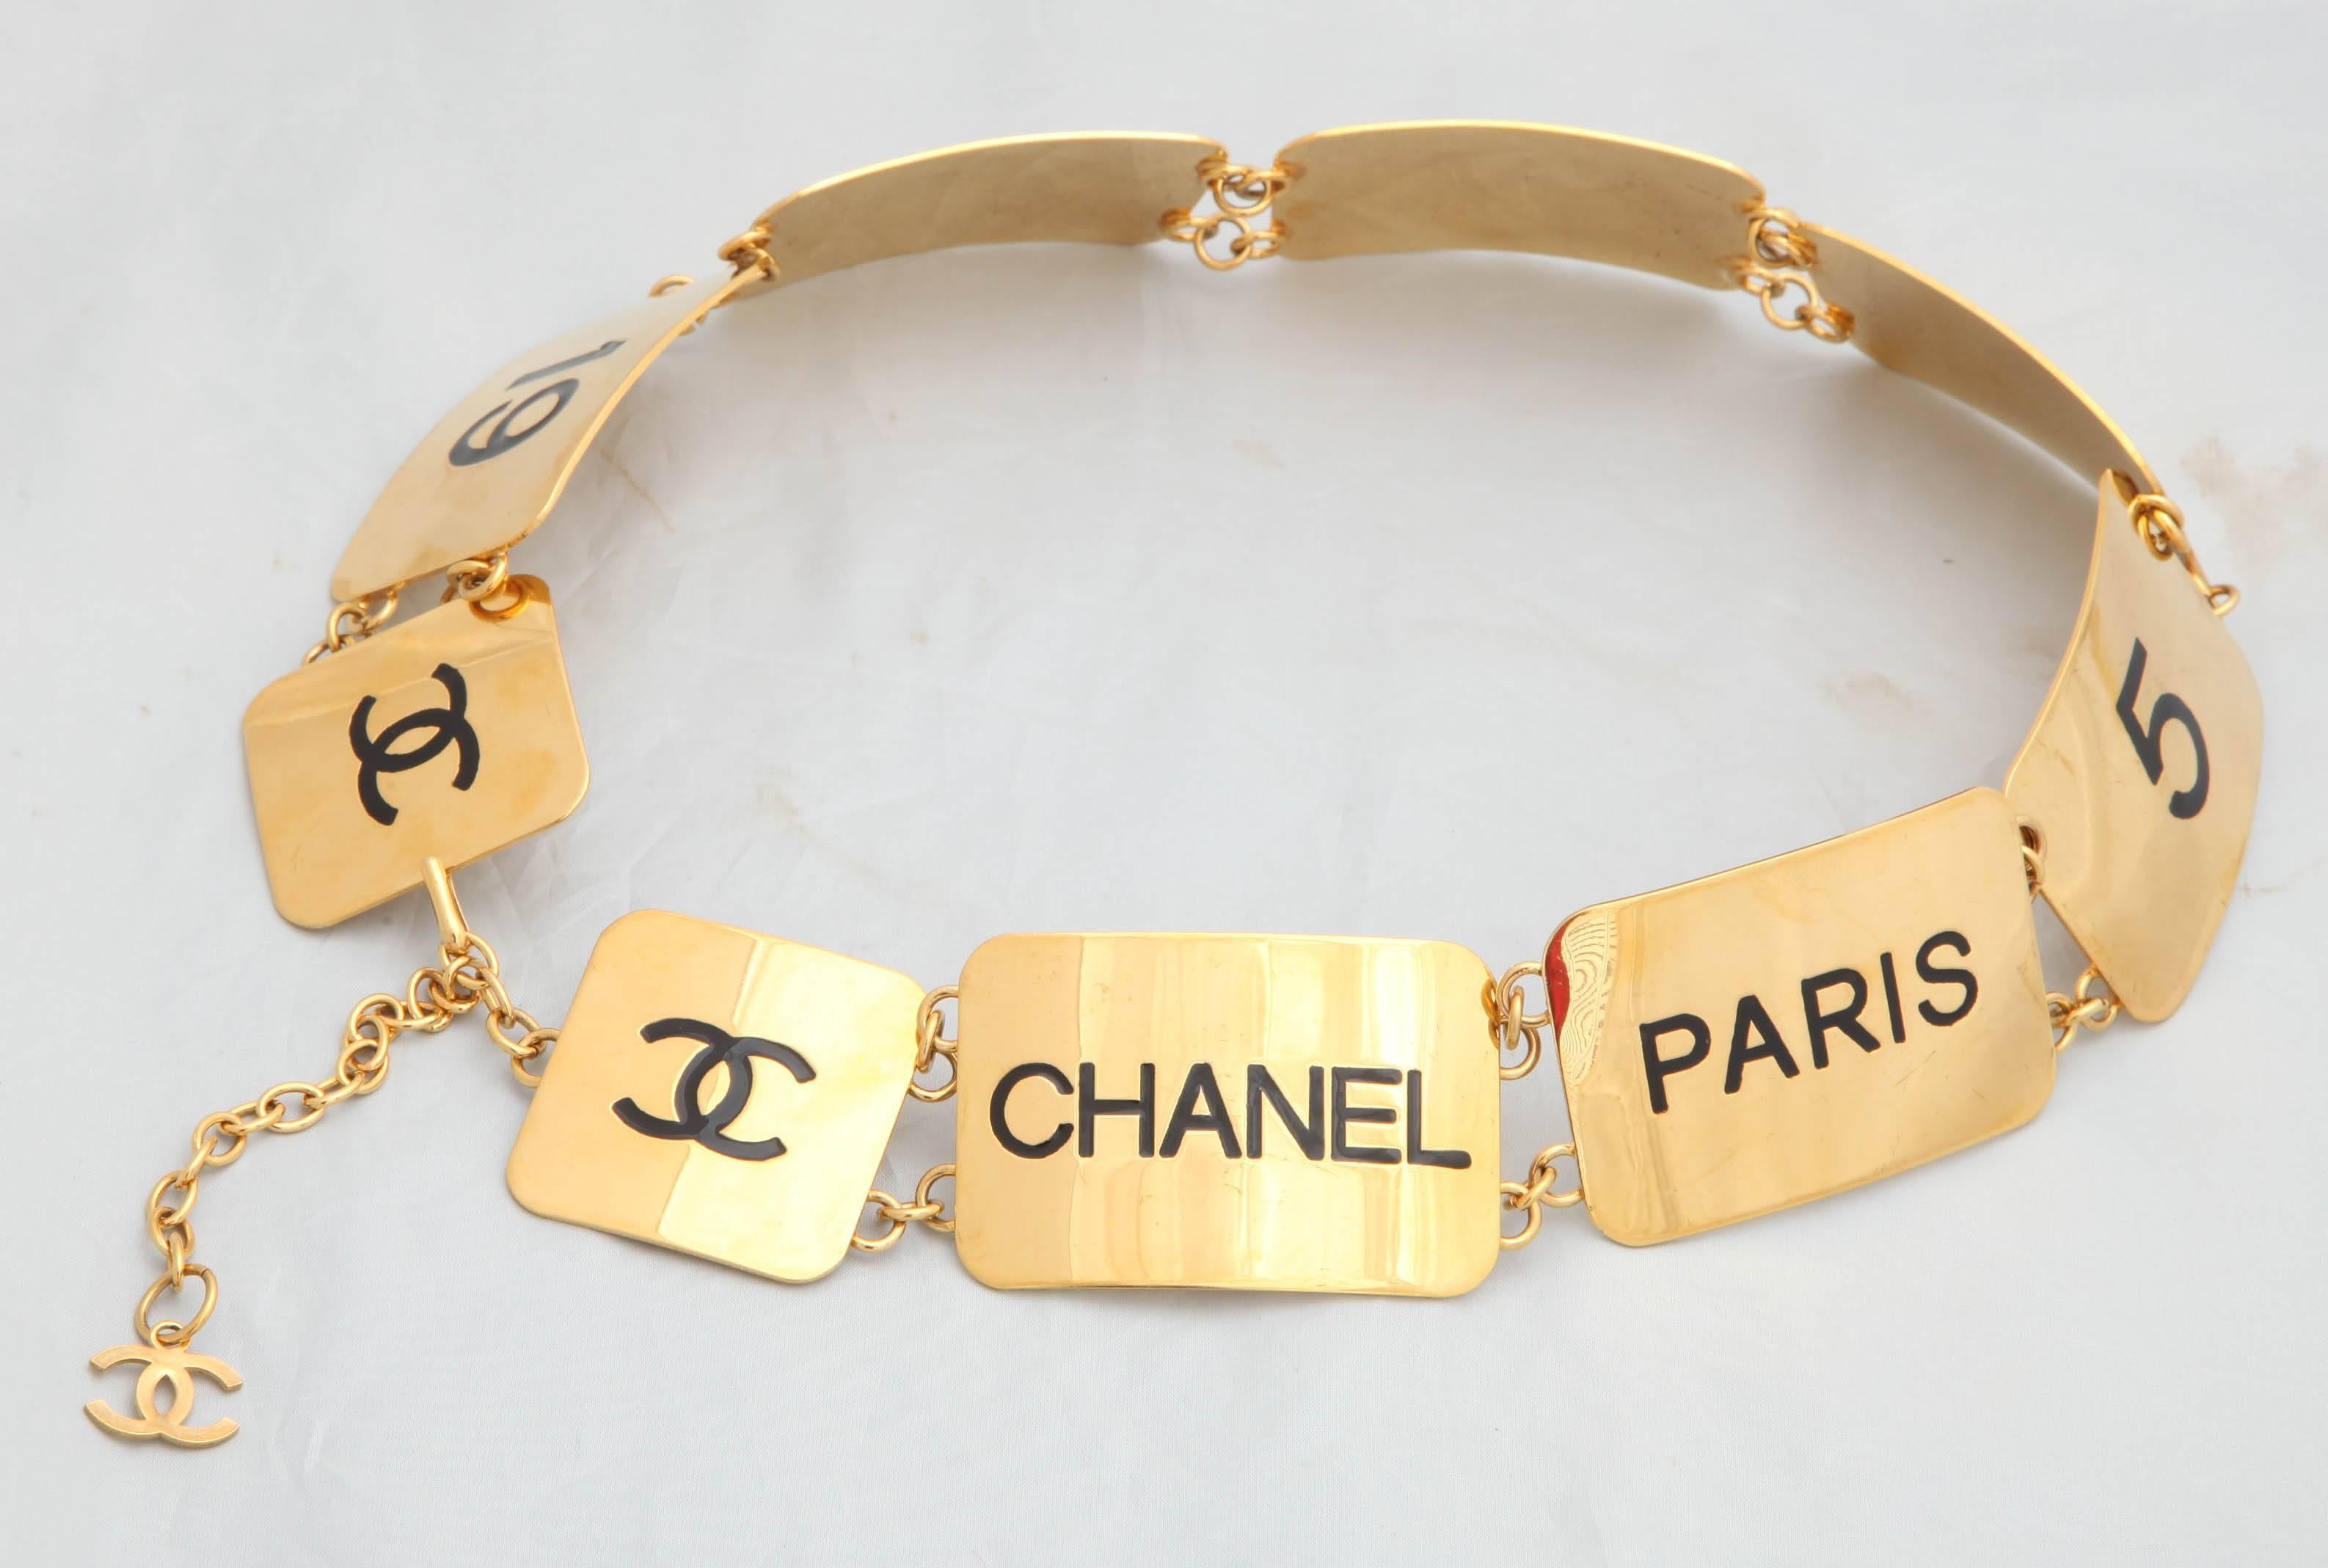 Extremely rare and hard to find Chanel belt, features Logos 